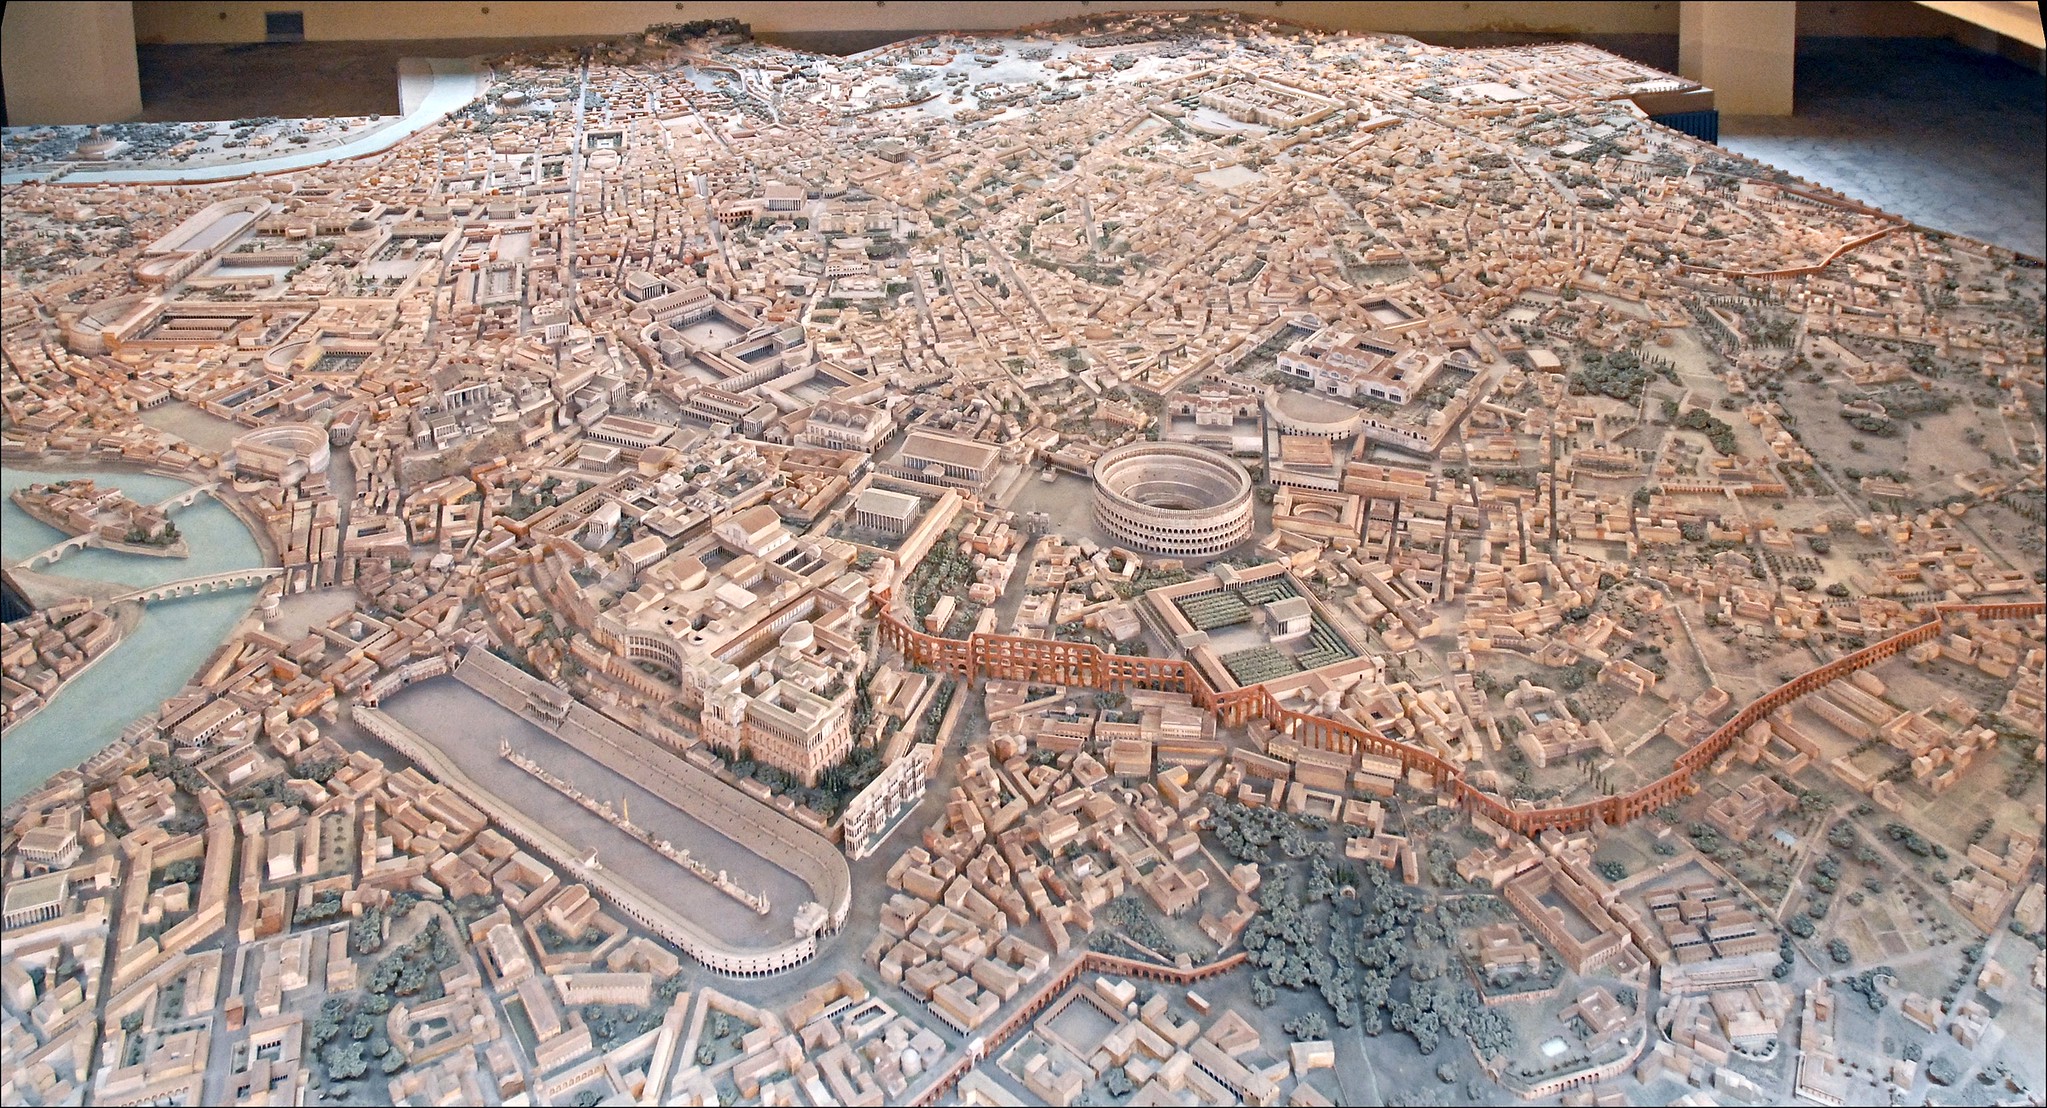 Archeologist Spends Over 35 Years Building Enormous Scale Model of Ancient Rome 18462958283_b9618348e9_k